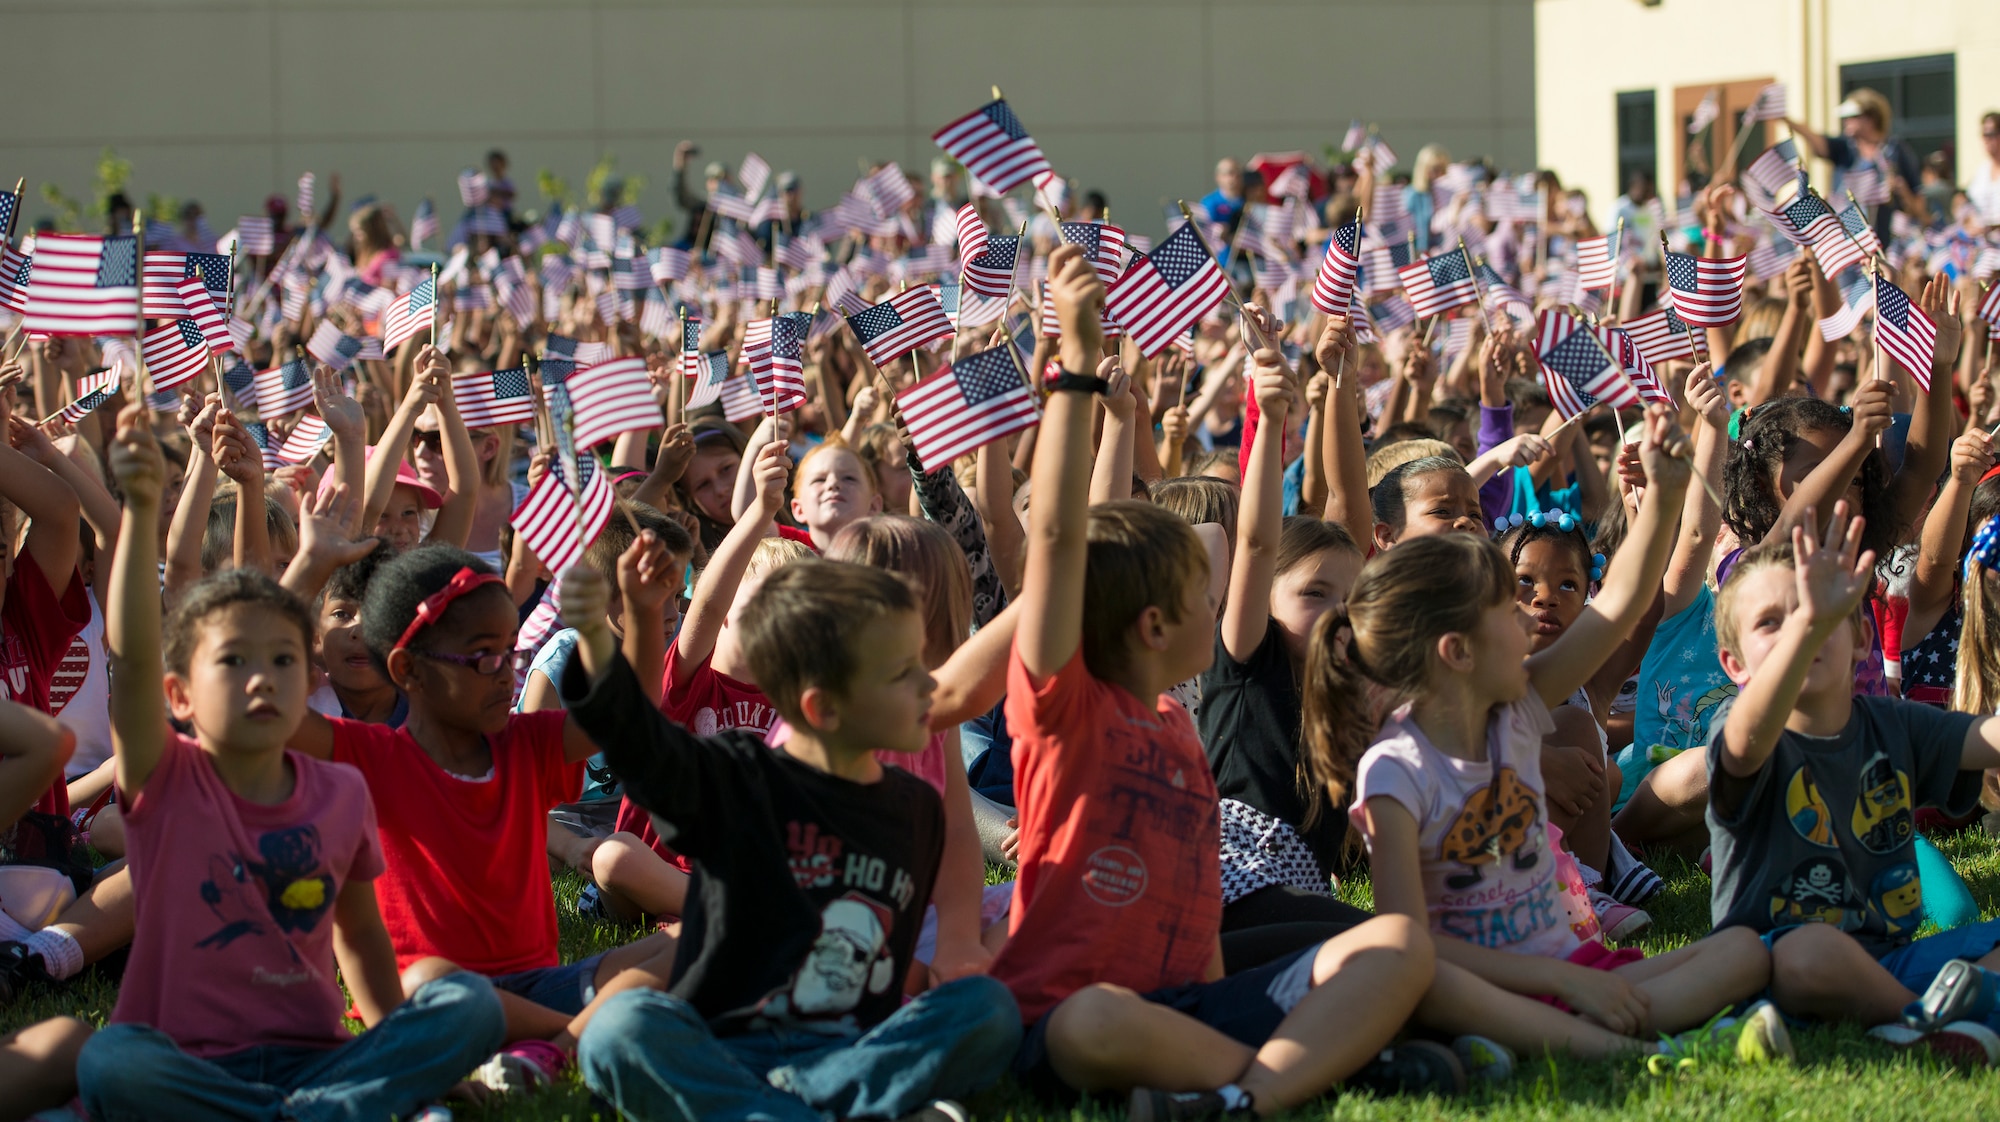 Children wave flags in reaction to the flag-folding ceremony performed by the Travis Air Force Base Honor Guard during the America Supports You Freedom Walk Ceremony Sept.11, 2014, at Travis. Schoolchildren from Travis School District schools attended the walk, a national tradition that calls on people to reflect on the lives lost on 9/11, remember those who responded, honor our veterans past and present and renew the commitment to freedom and the values of the country. (U.S. Air Force photo by Heide Couch)